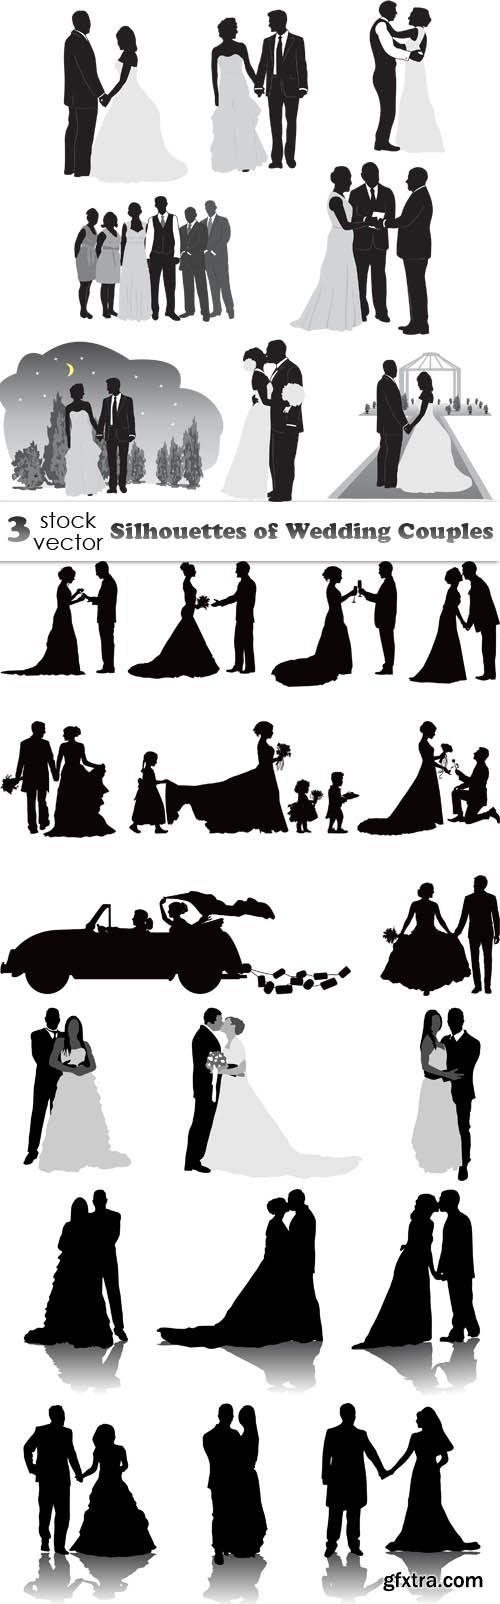 Vectors - Silhouettes of Wedding Couples